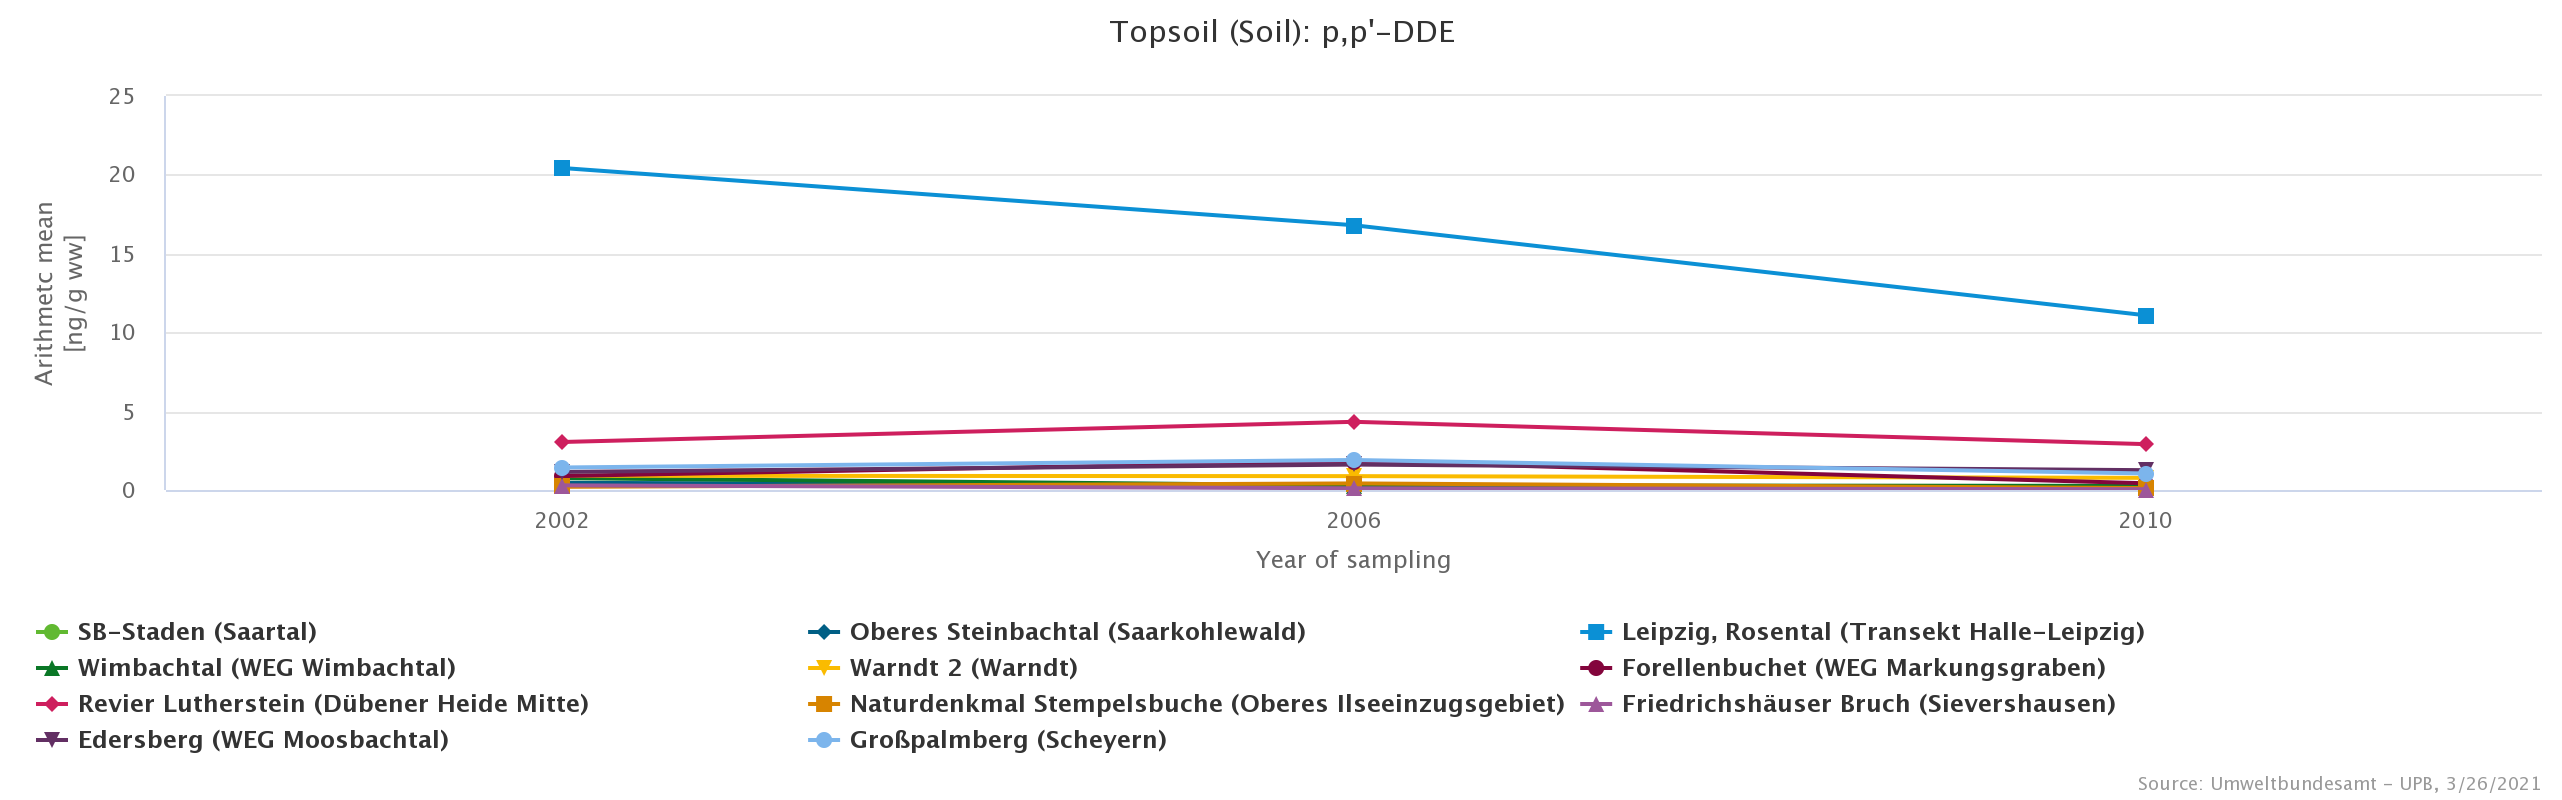 Significantly higher DDT metabolite levels in soils from the former German Democratic Republic